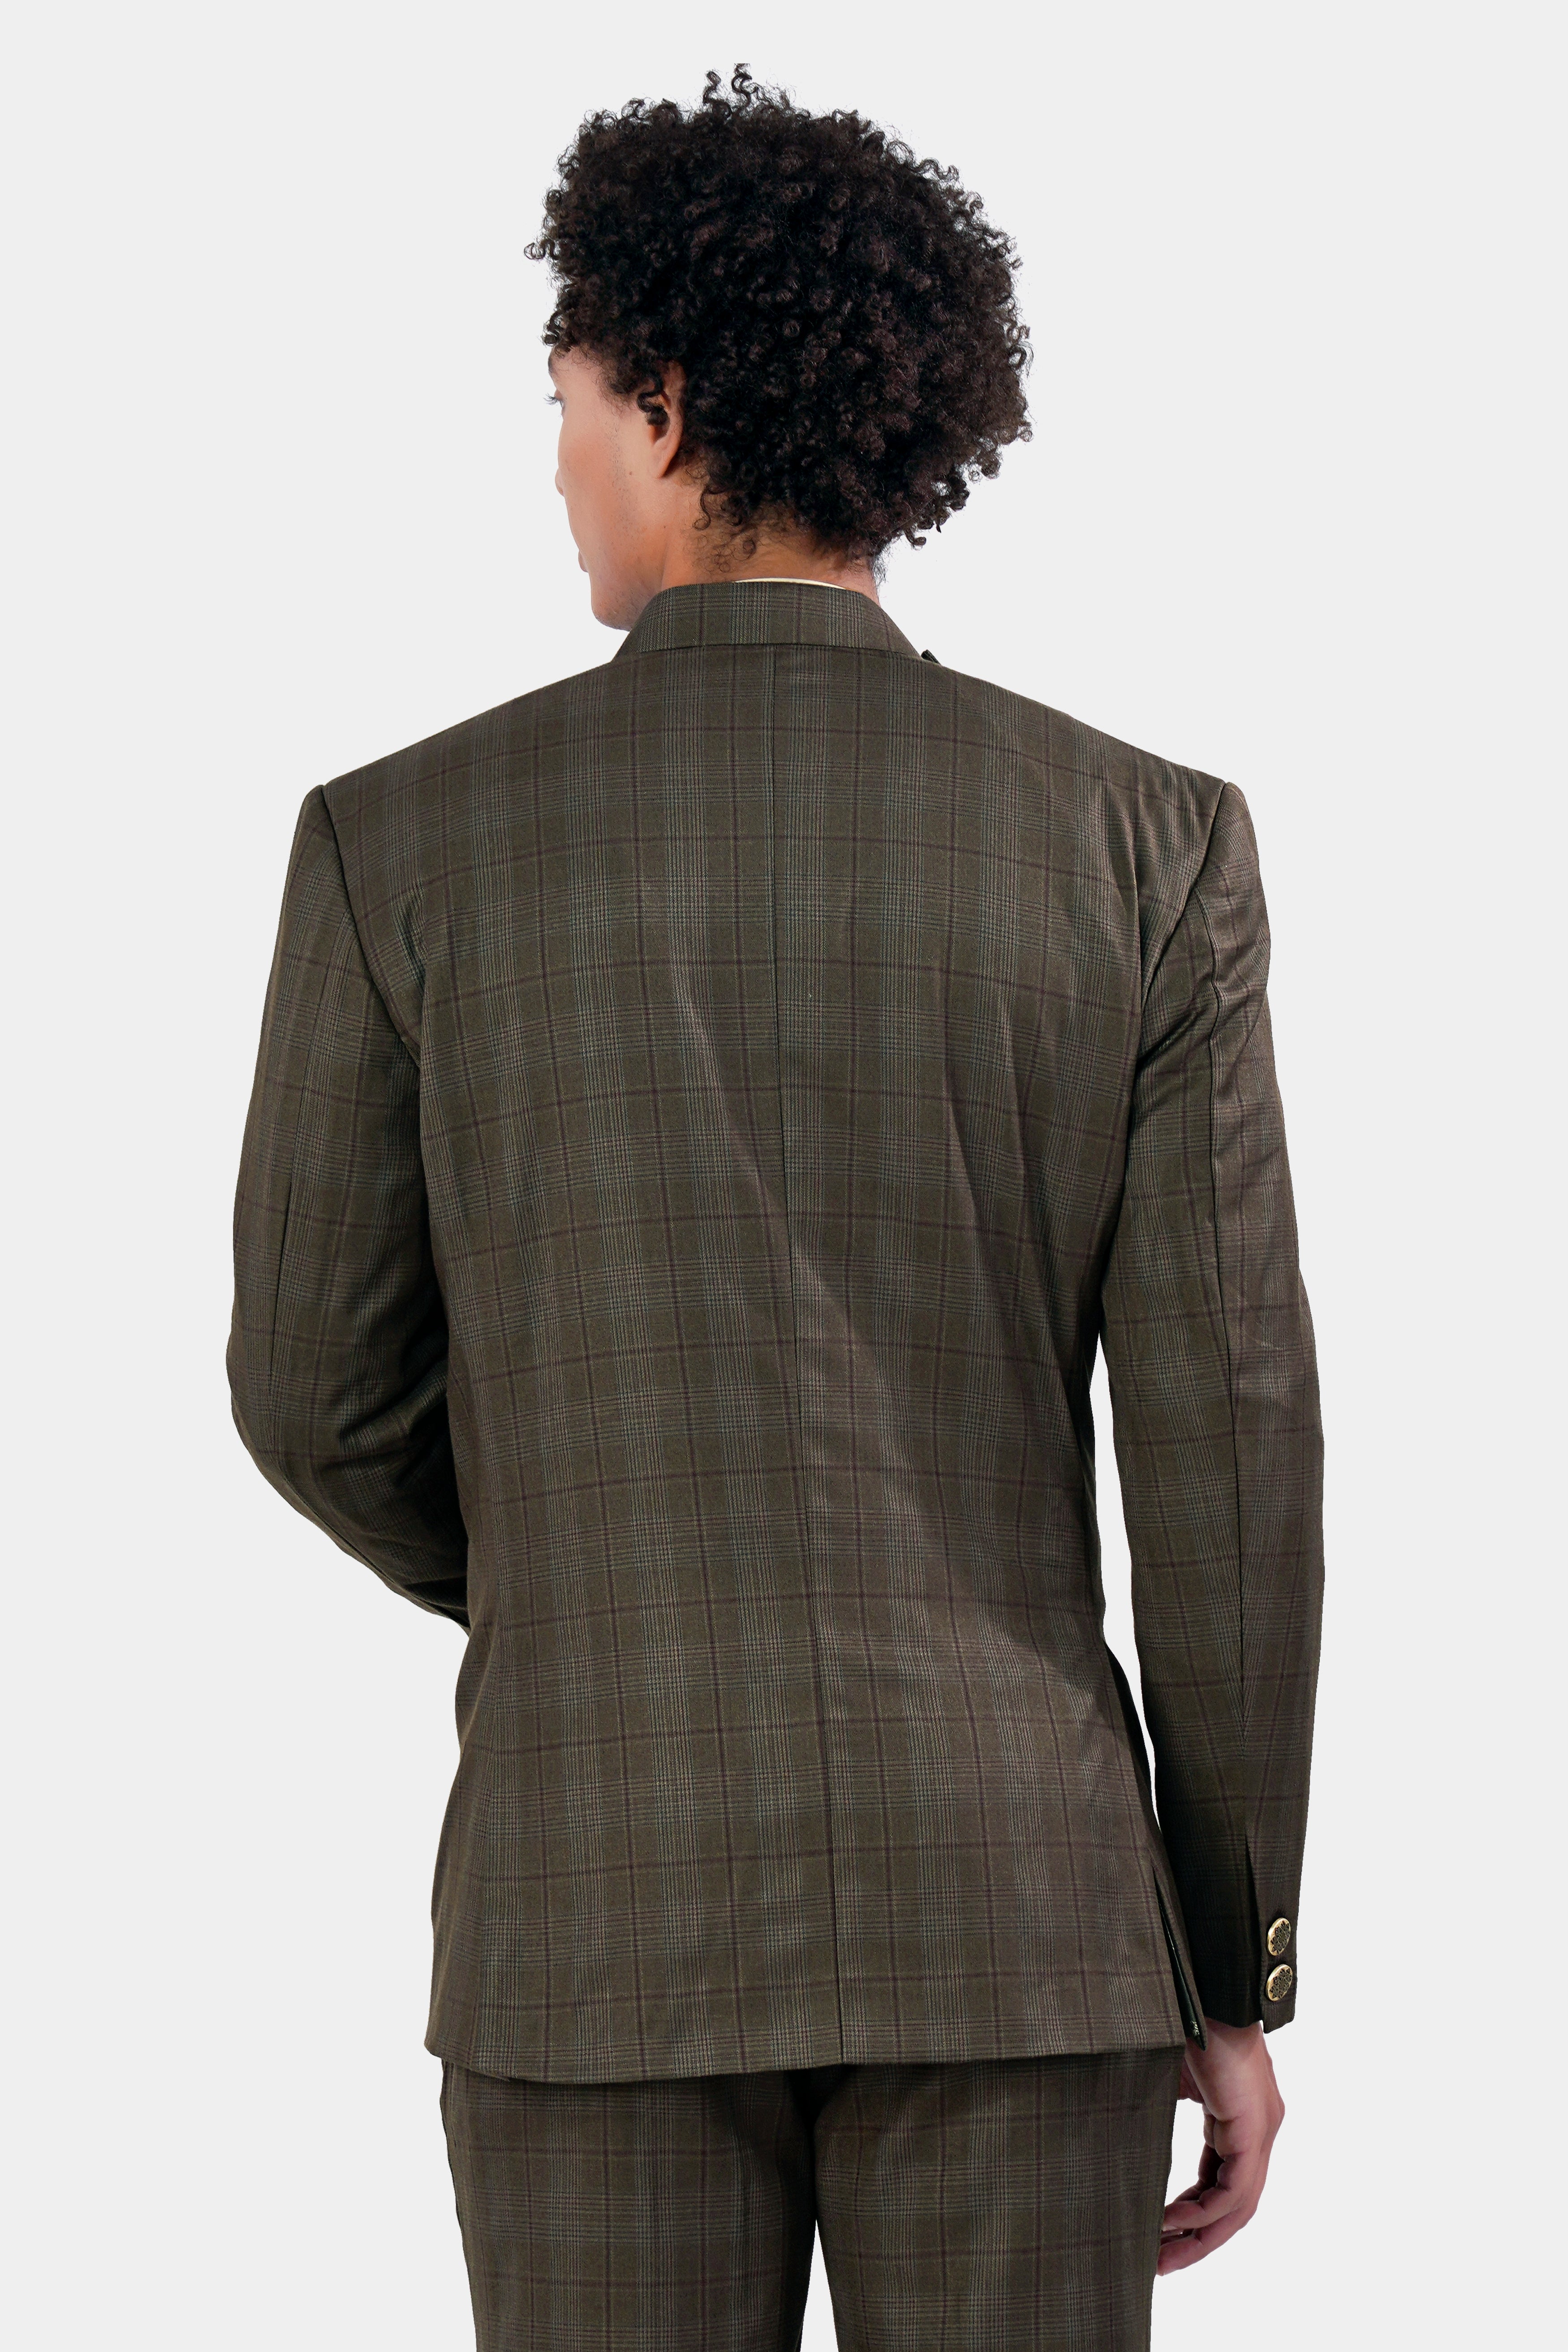 Fuscous Green and Bistre Brown Plaid Wool Rich Cross Buttoned Bandhgala Suit ST2951-CBG2-36, ST2951-CBG2-38, ST2951-CBG2-40, ST2951-CBG2-42, ST2951-CBG2-44, ST2951-CBG2-46, ST2951-CBG2-48, ST2951-CBG2-50, ST2951-CBG2-52, ST2951-CBG2-54, ST2951-CBG2-56, ST2951-CBG2-58, ST2951-CBG2-60